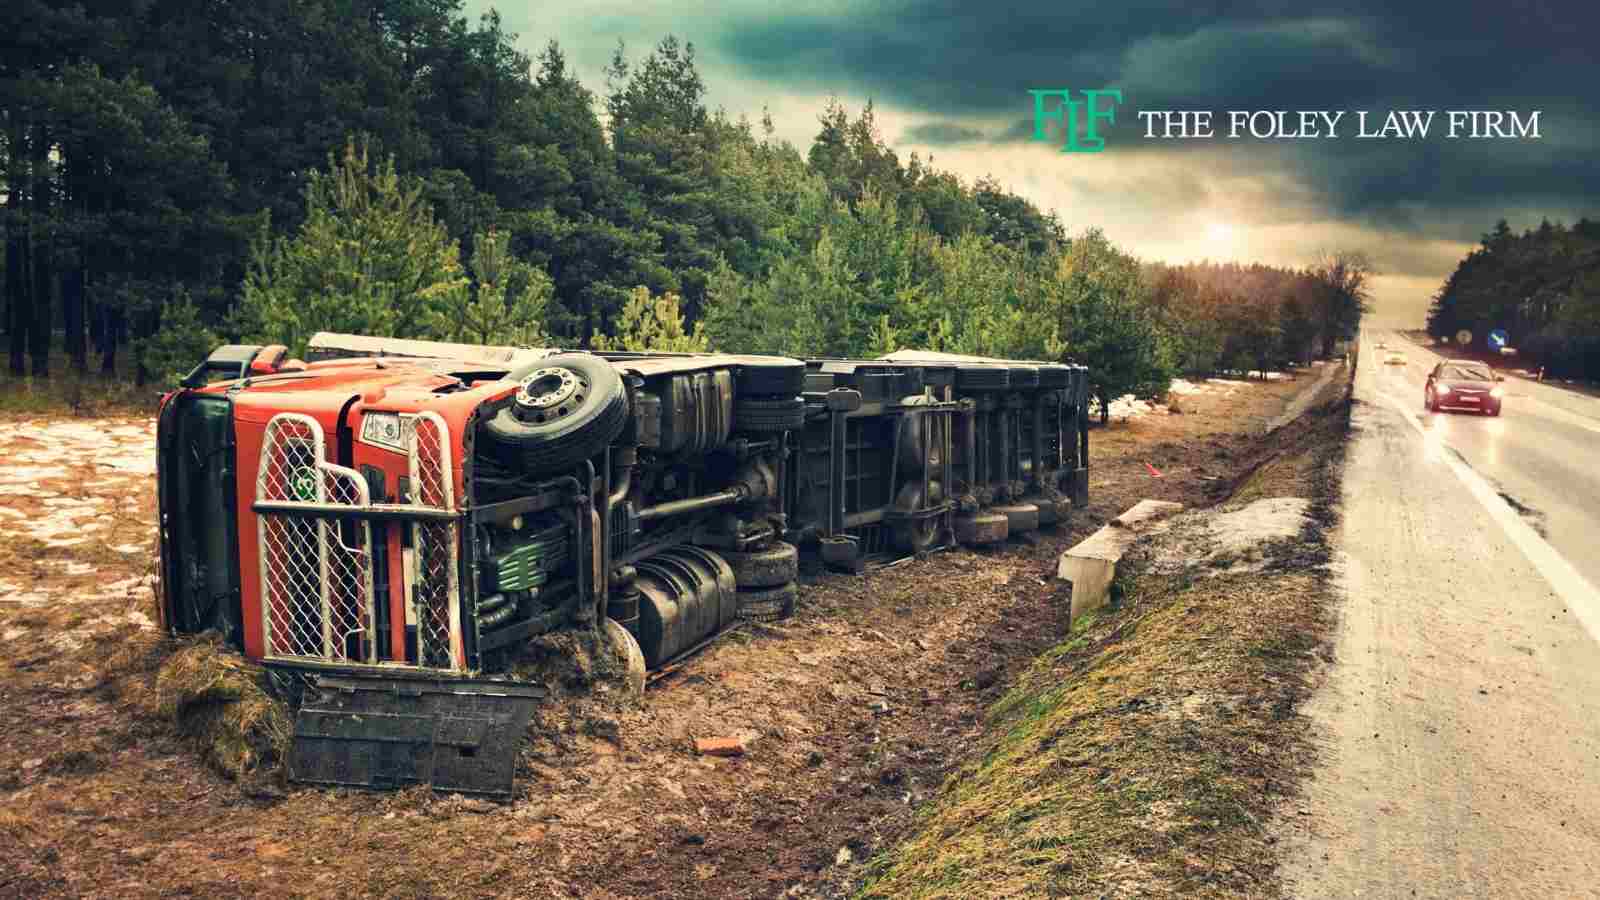 Key evidence in a truck accident claim